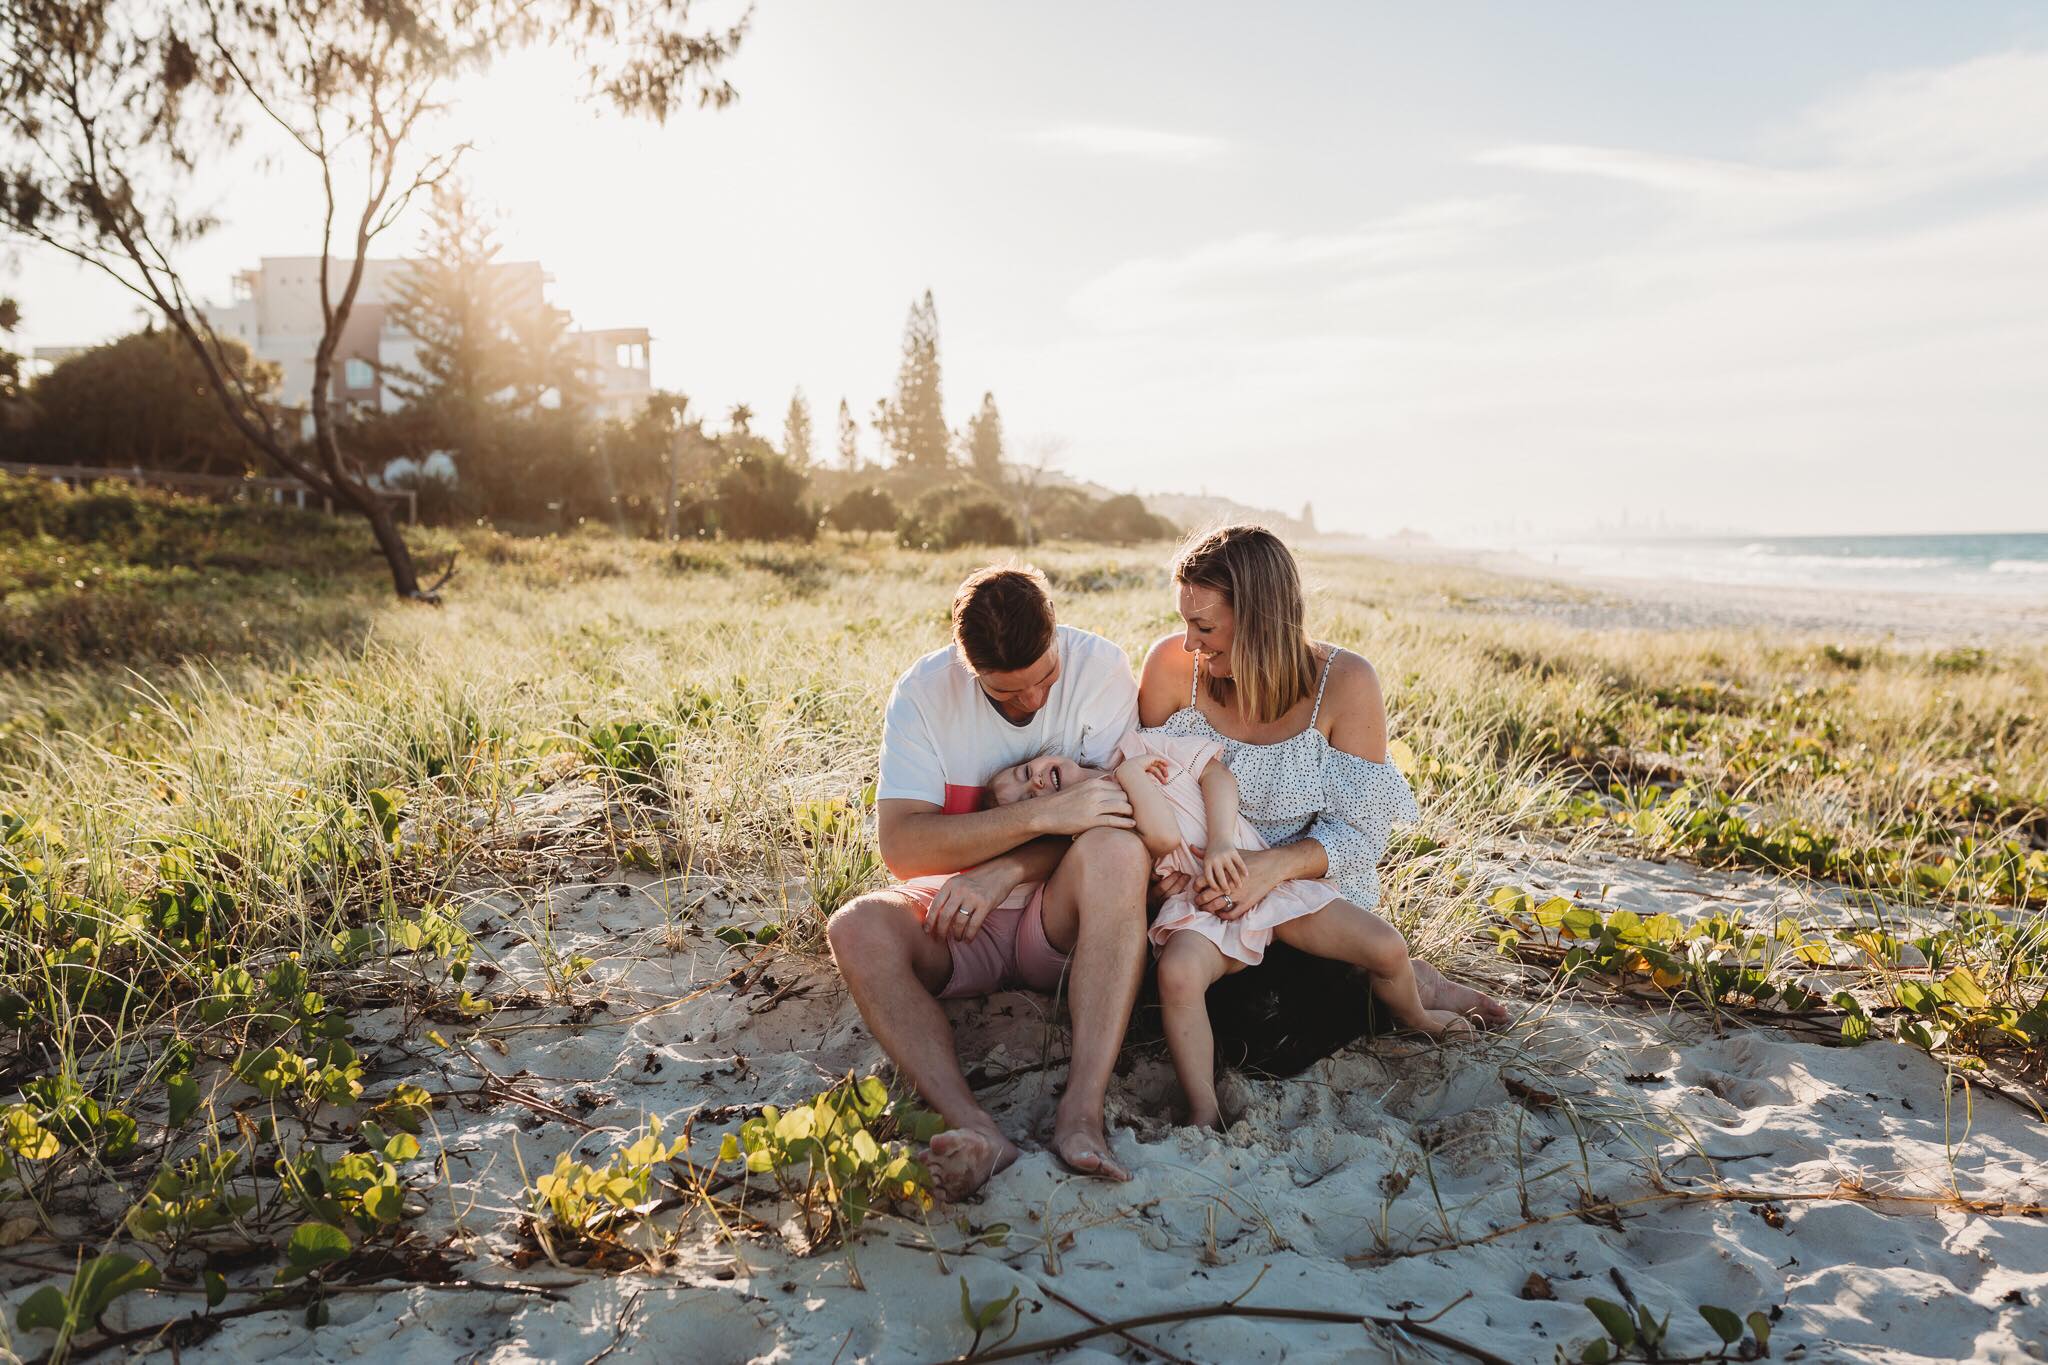  ideas for family pictures at the beach during sunset